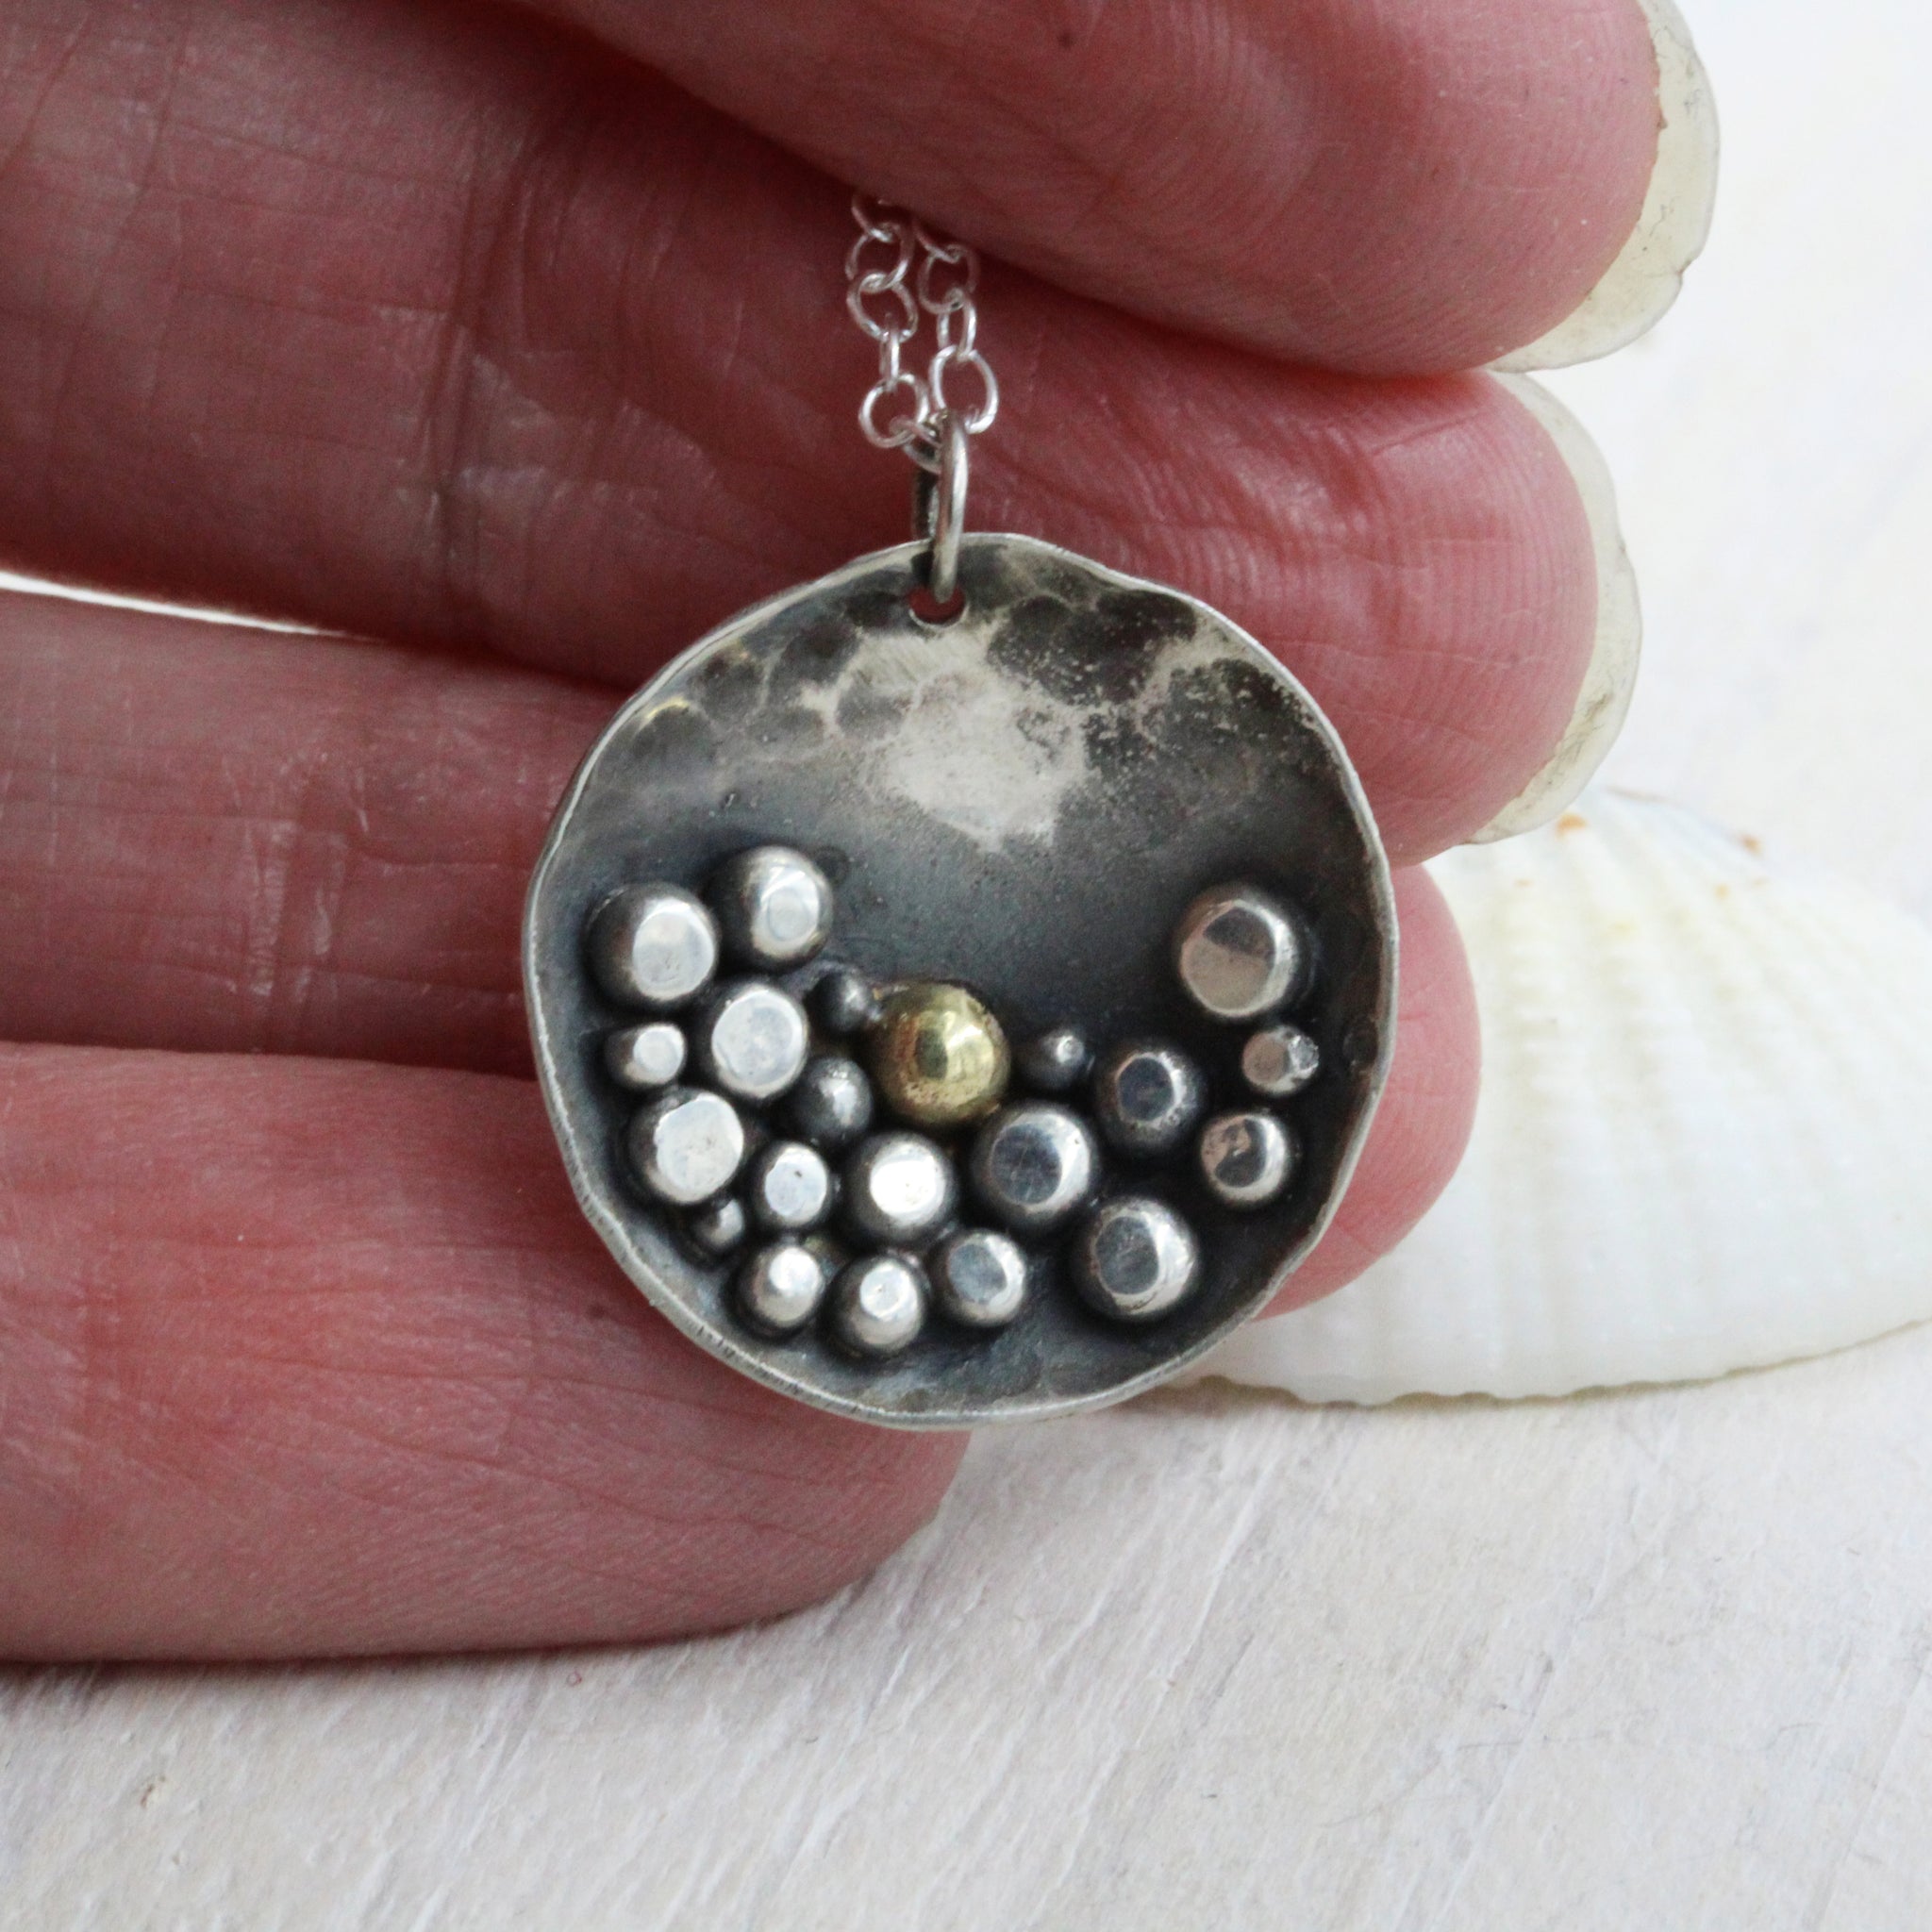 Pebbles on the Beach inspired sterling silver necklace, featuring a deep patina and silver pebble details 